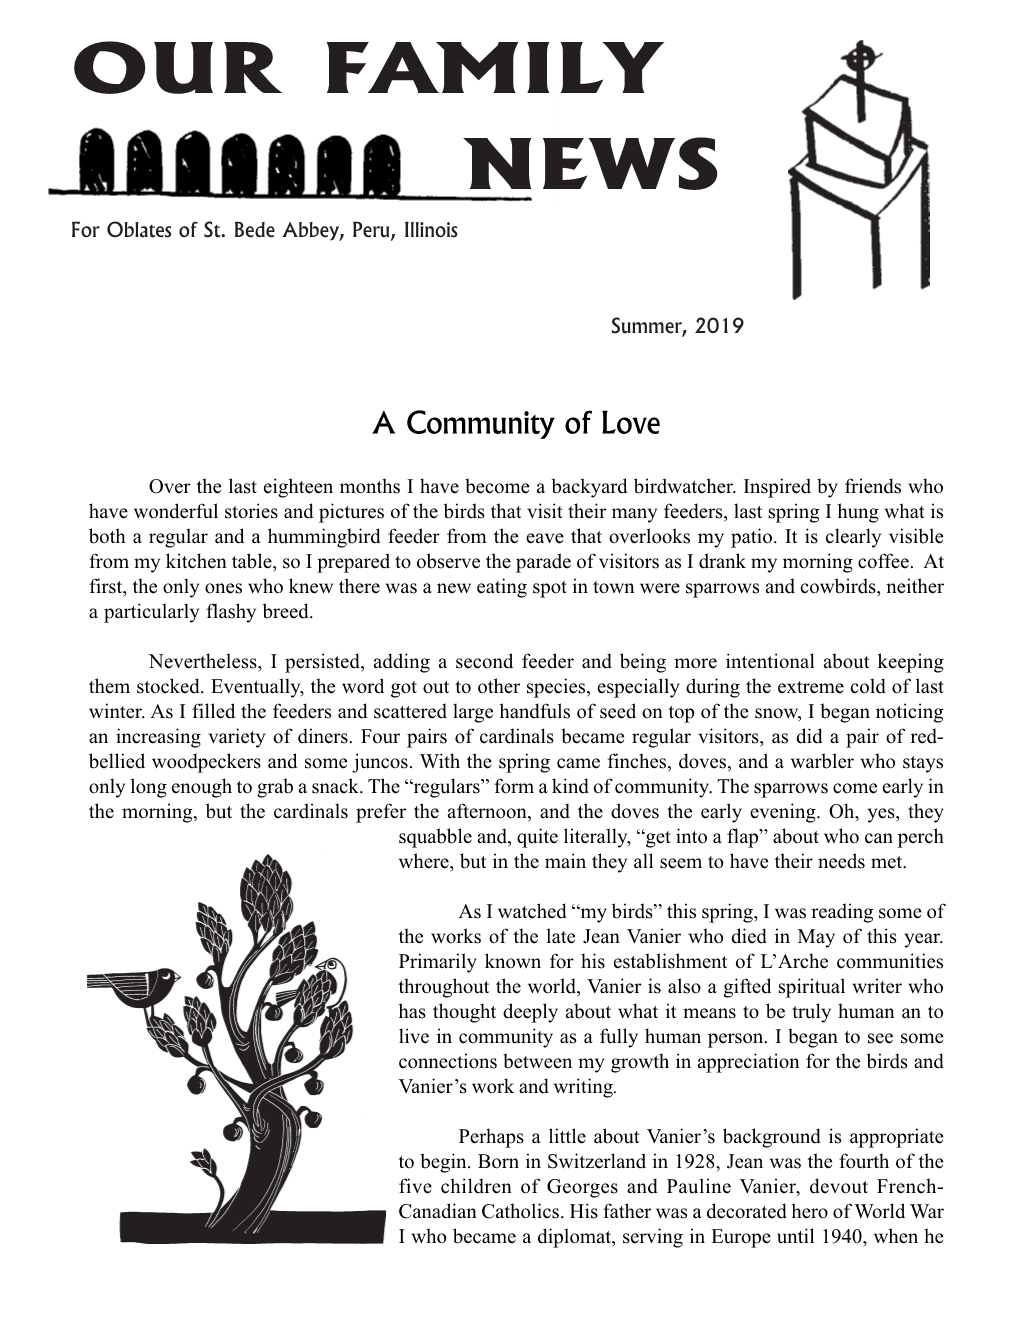 OUR FAMILY NEWS for Oblates of St